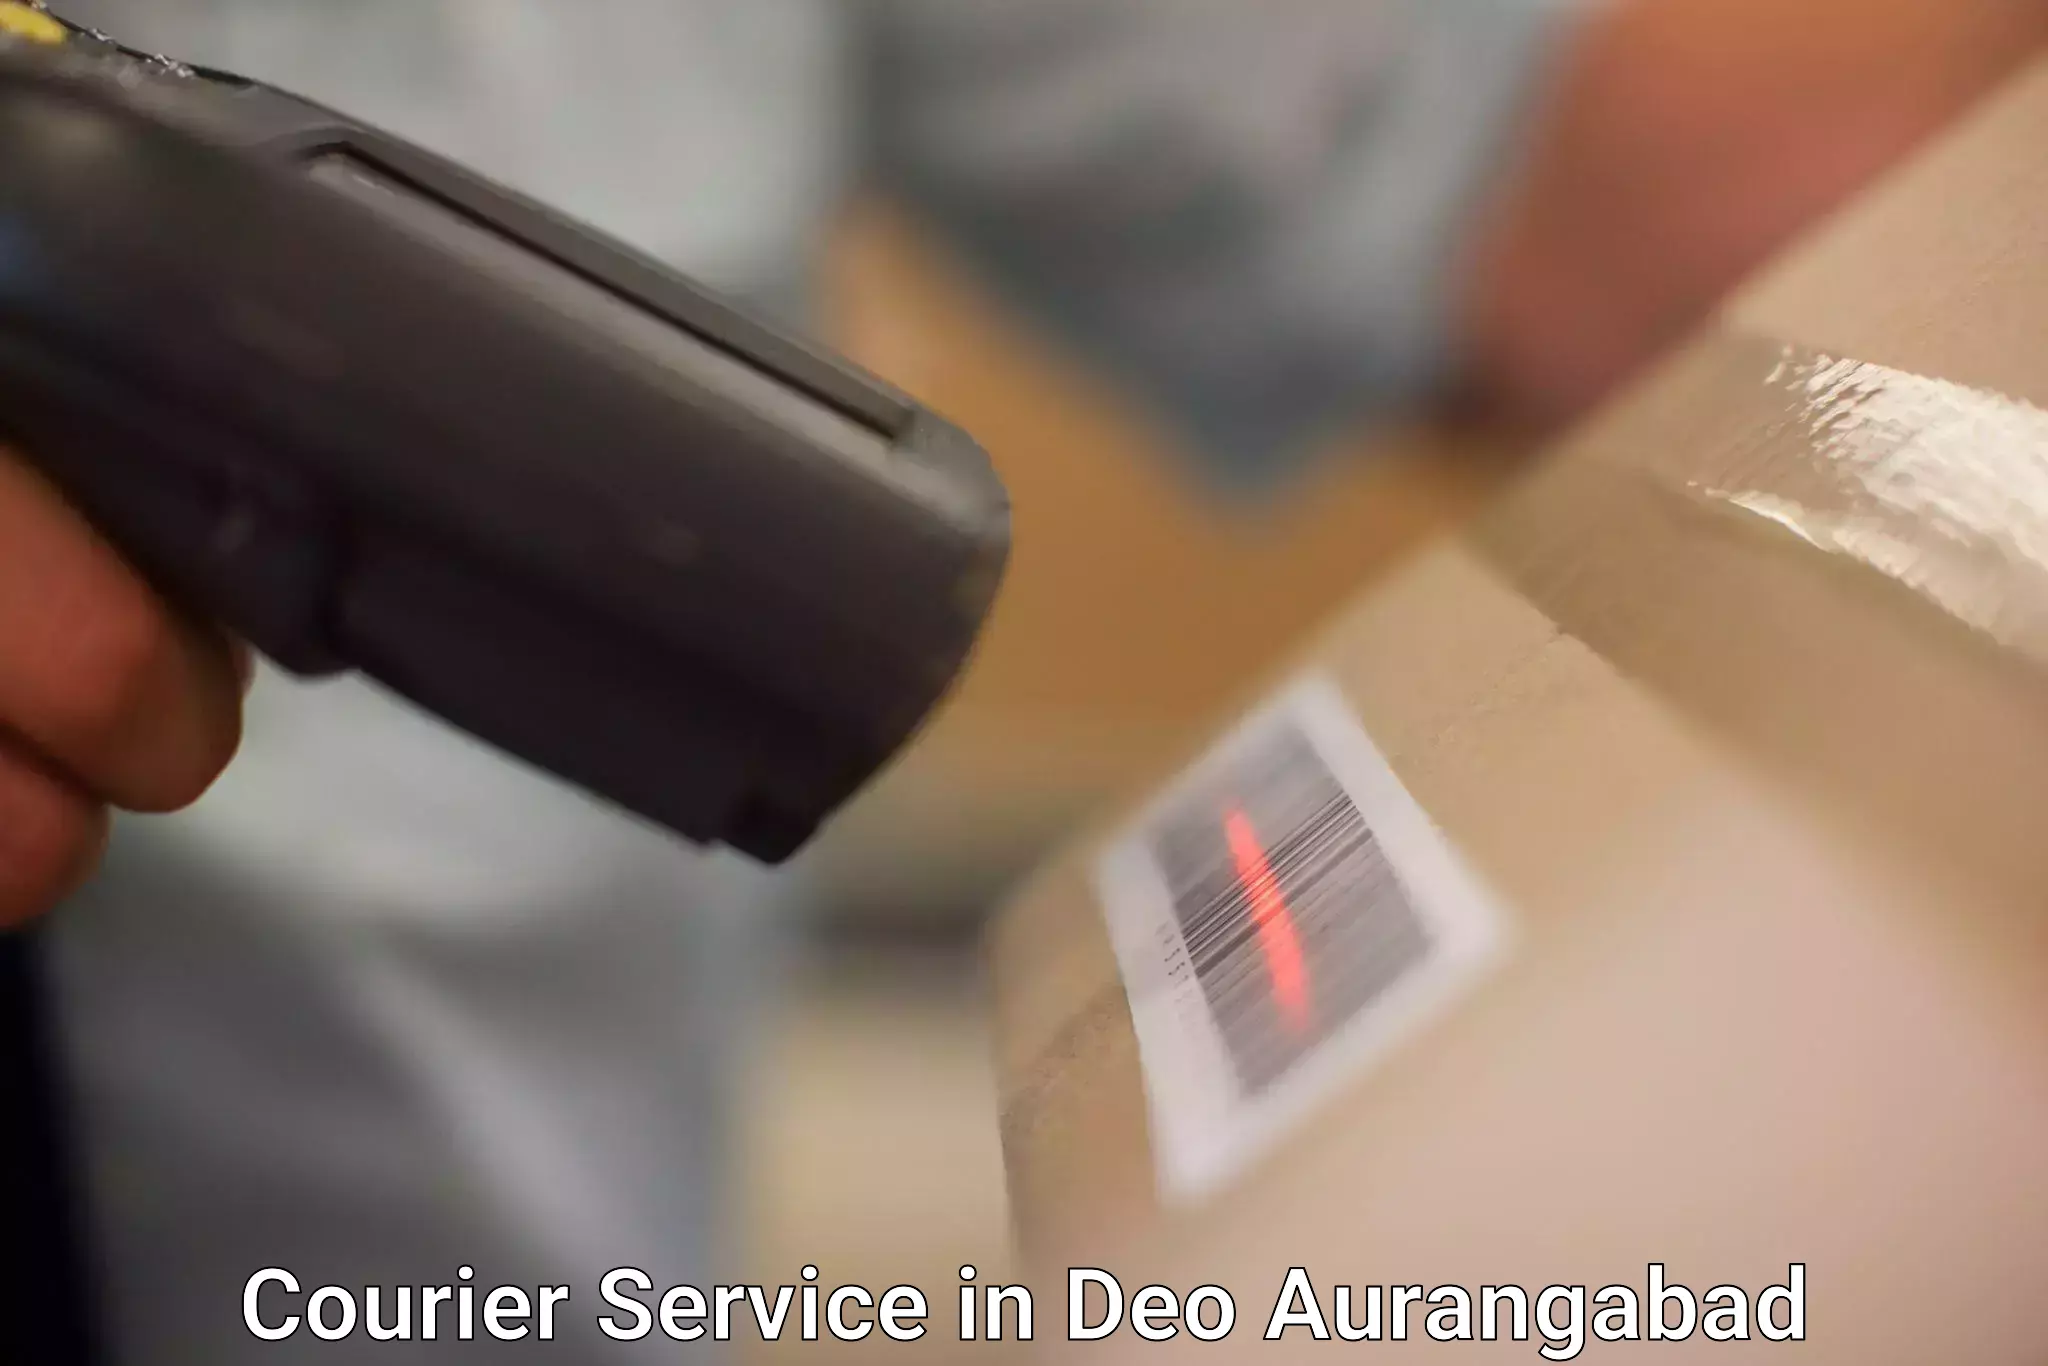 Express shipping in Deo Aurangabad